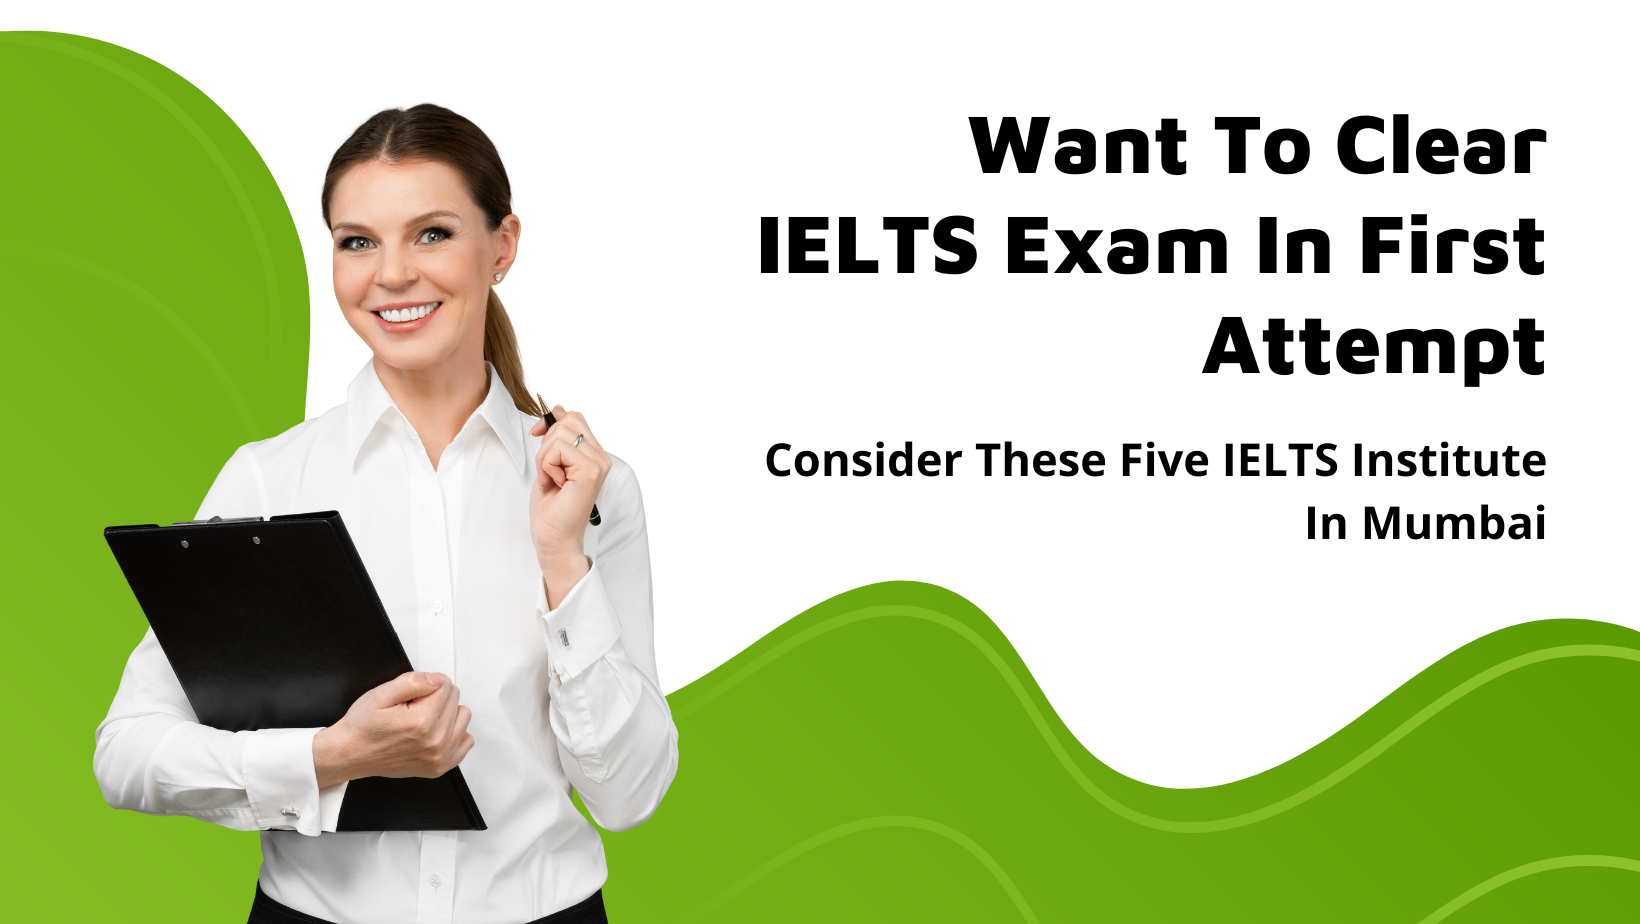 Want To Crack IELTS Exam In First Attempt? Consider These Five IELTS Institutes In Mumbai